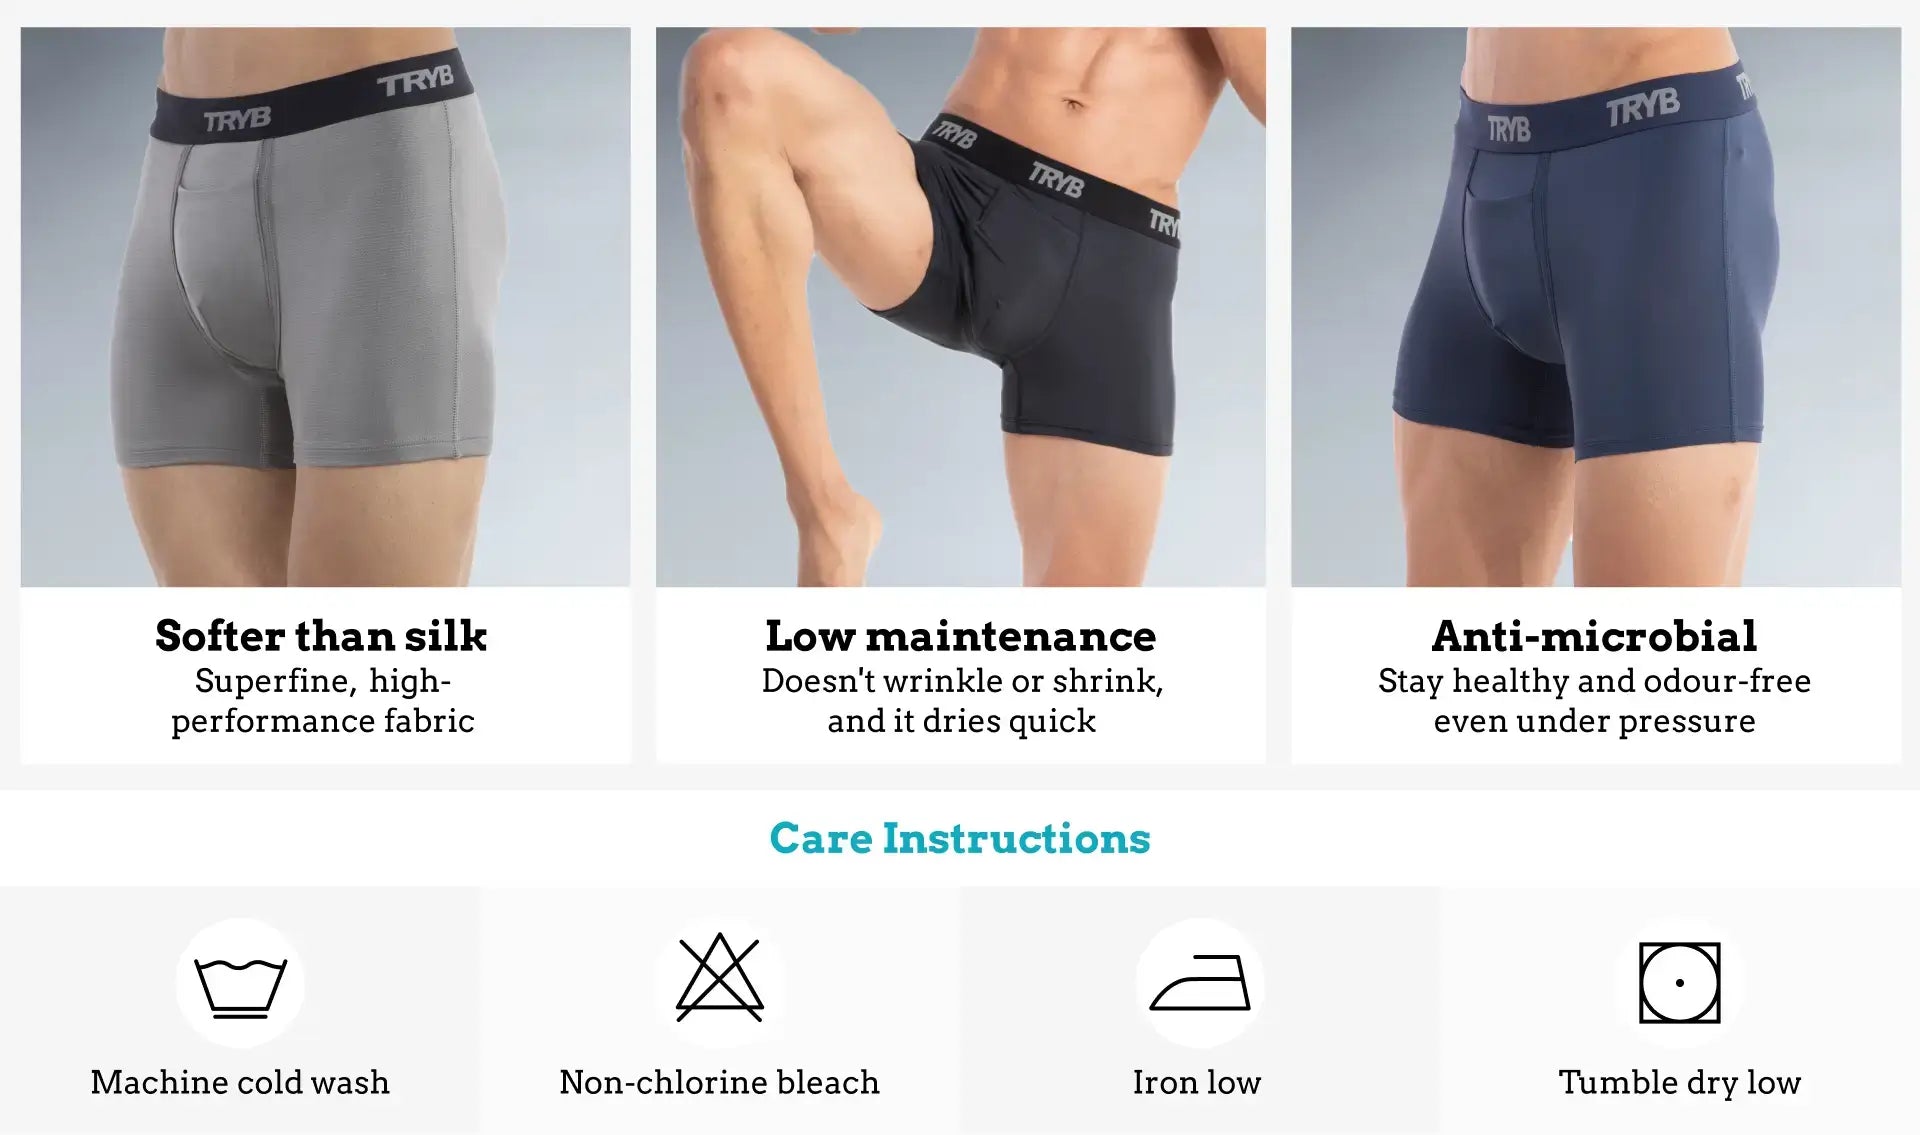 TRYB Mens Underwear - Features & Care Instructions